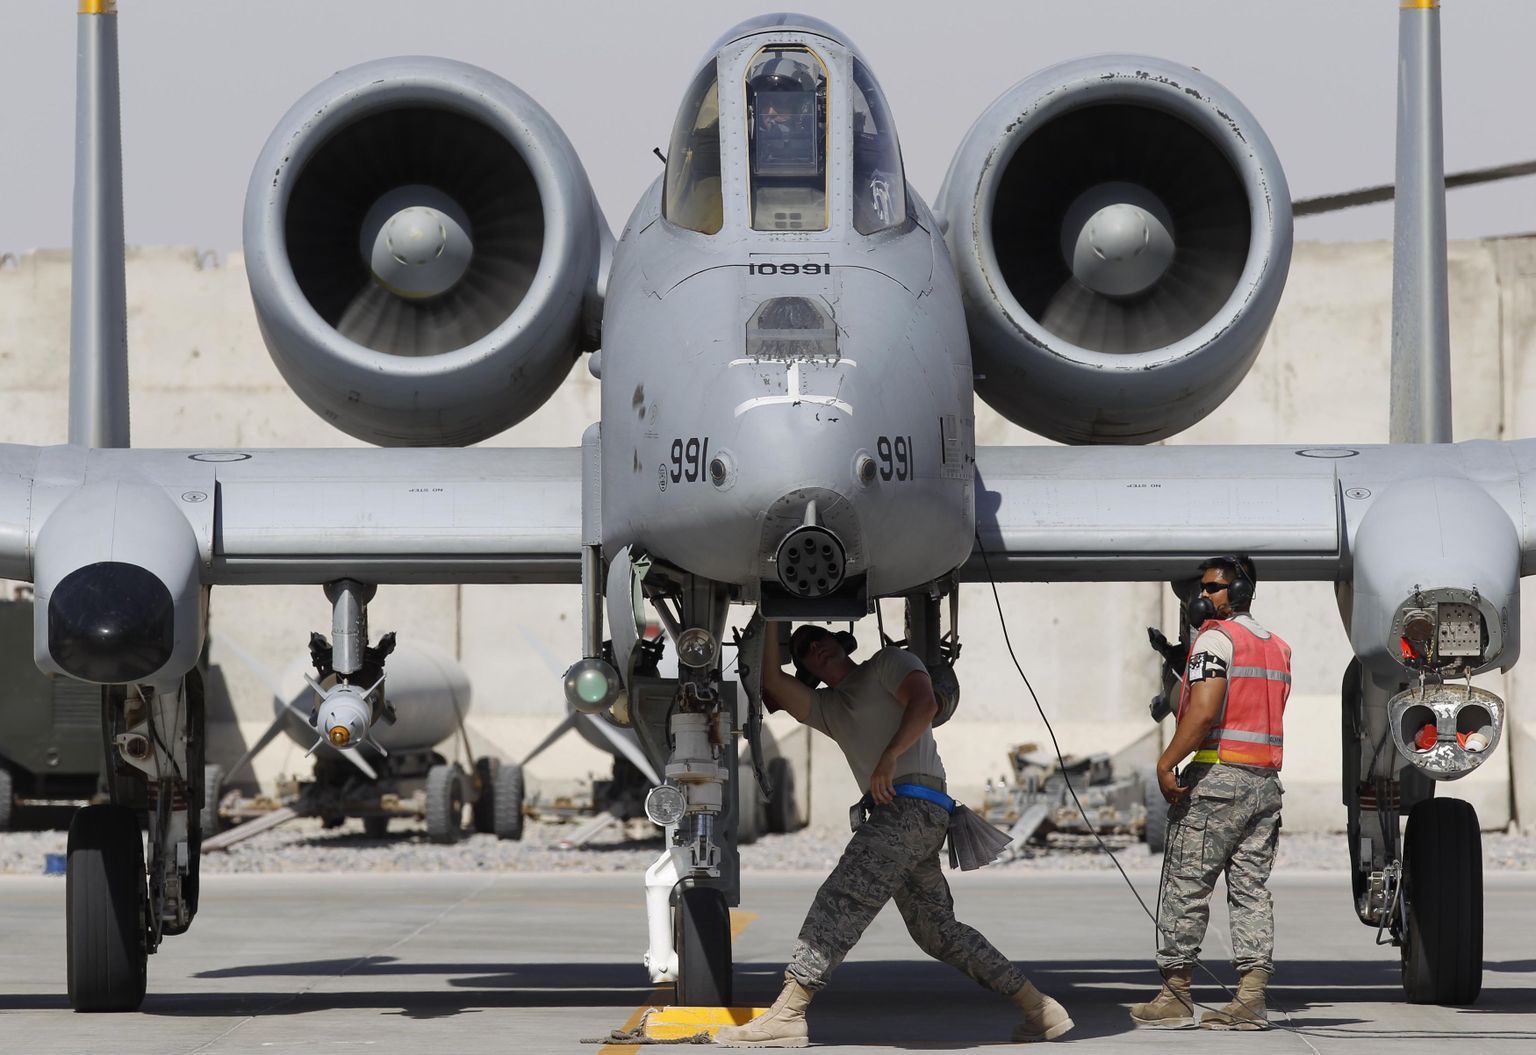 U.S. Air Force ground staff members check on an A-10 Thunderbolt II fighter-jet from the 81st Expeditionary Fighter Squadron after its landing at Kandahar Air Field in this September 2, 2010 file photo. The Pentagon said on February 24, 2014 it would shrink the U.S. Army to pre-World War Two levels, eliminate the popular A-10 aircraft and reduce military benefits in order to meet 2015 spending caps, setting up an election-year fight with the Congress over national defense priorities.  REUTERS/Oleg Popov/Files    (AFGHANISTAN - Tags: CONFLICT MILITARY TRANSPORT POLITICS)